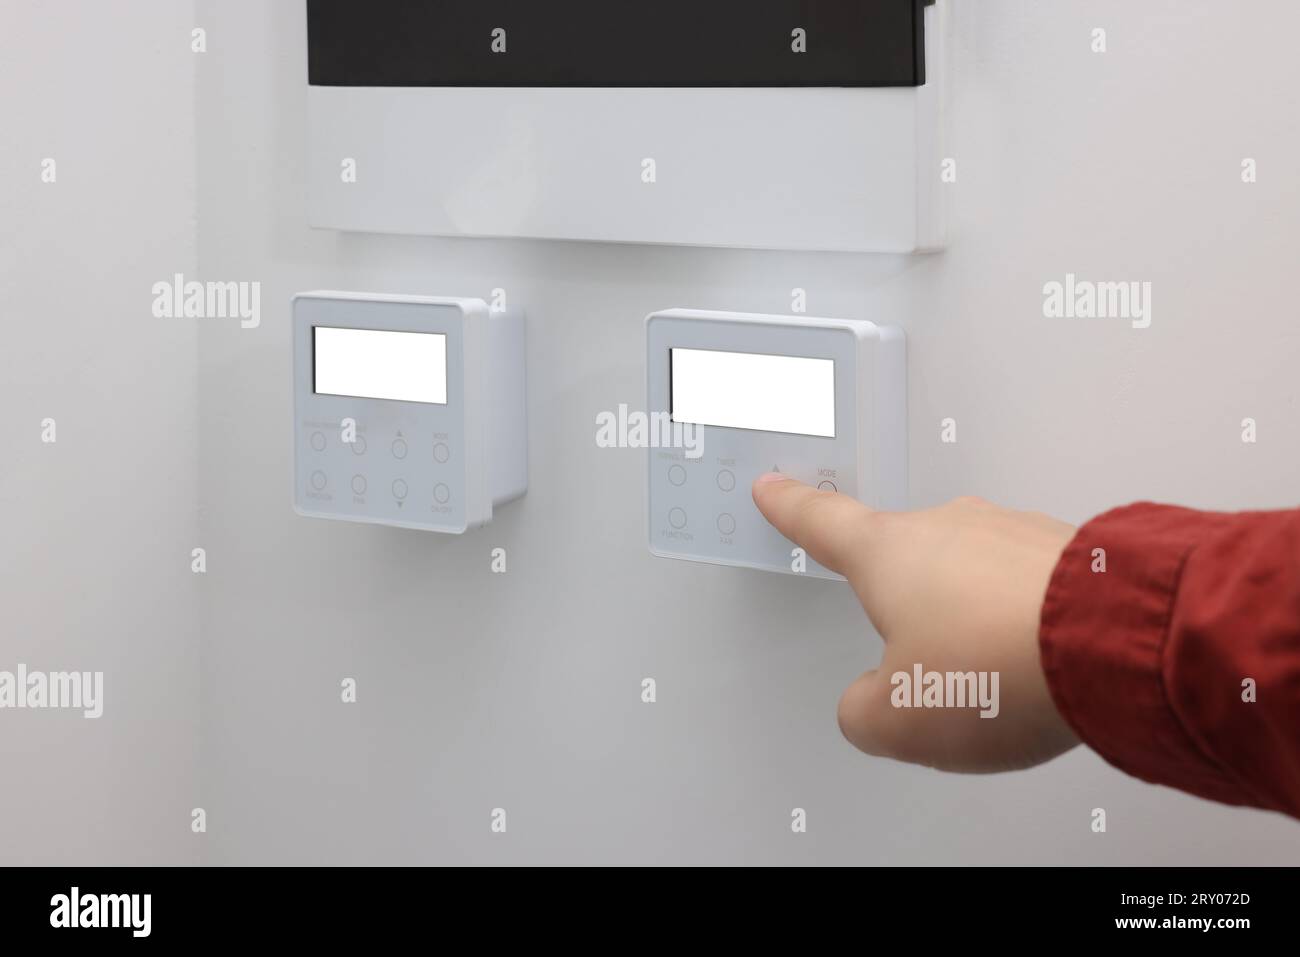 Man adjusting thermostat on white wall, closeup. Smart home system Stock Photo